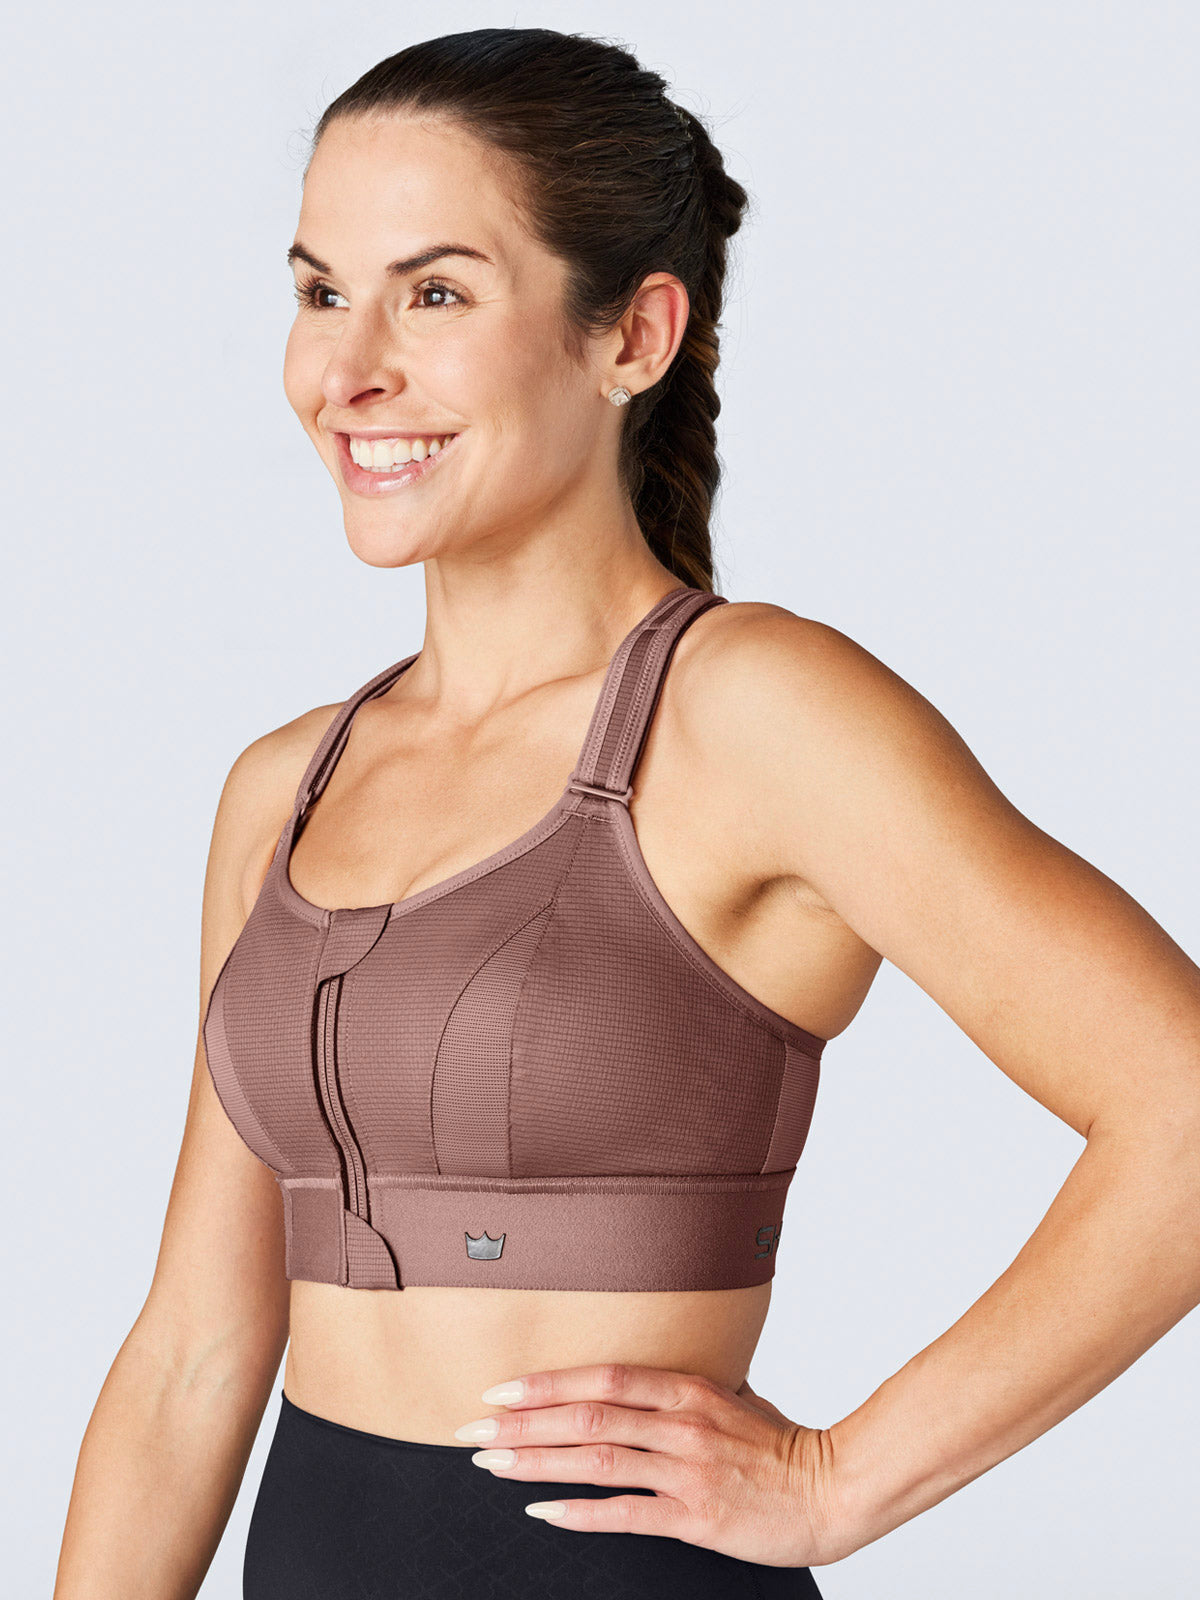 Shefit Ultimate Sports Bra, Just Zip, Cinch and Lift. The Shefit Ultimate  Sports Bra is an adjustable, high-impact sports bra that provides the  perfect comfort and support for any